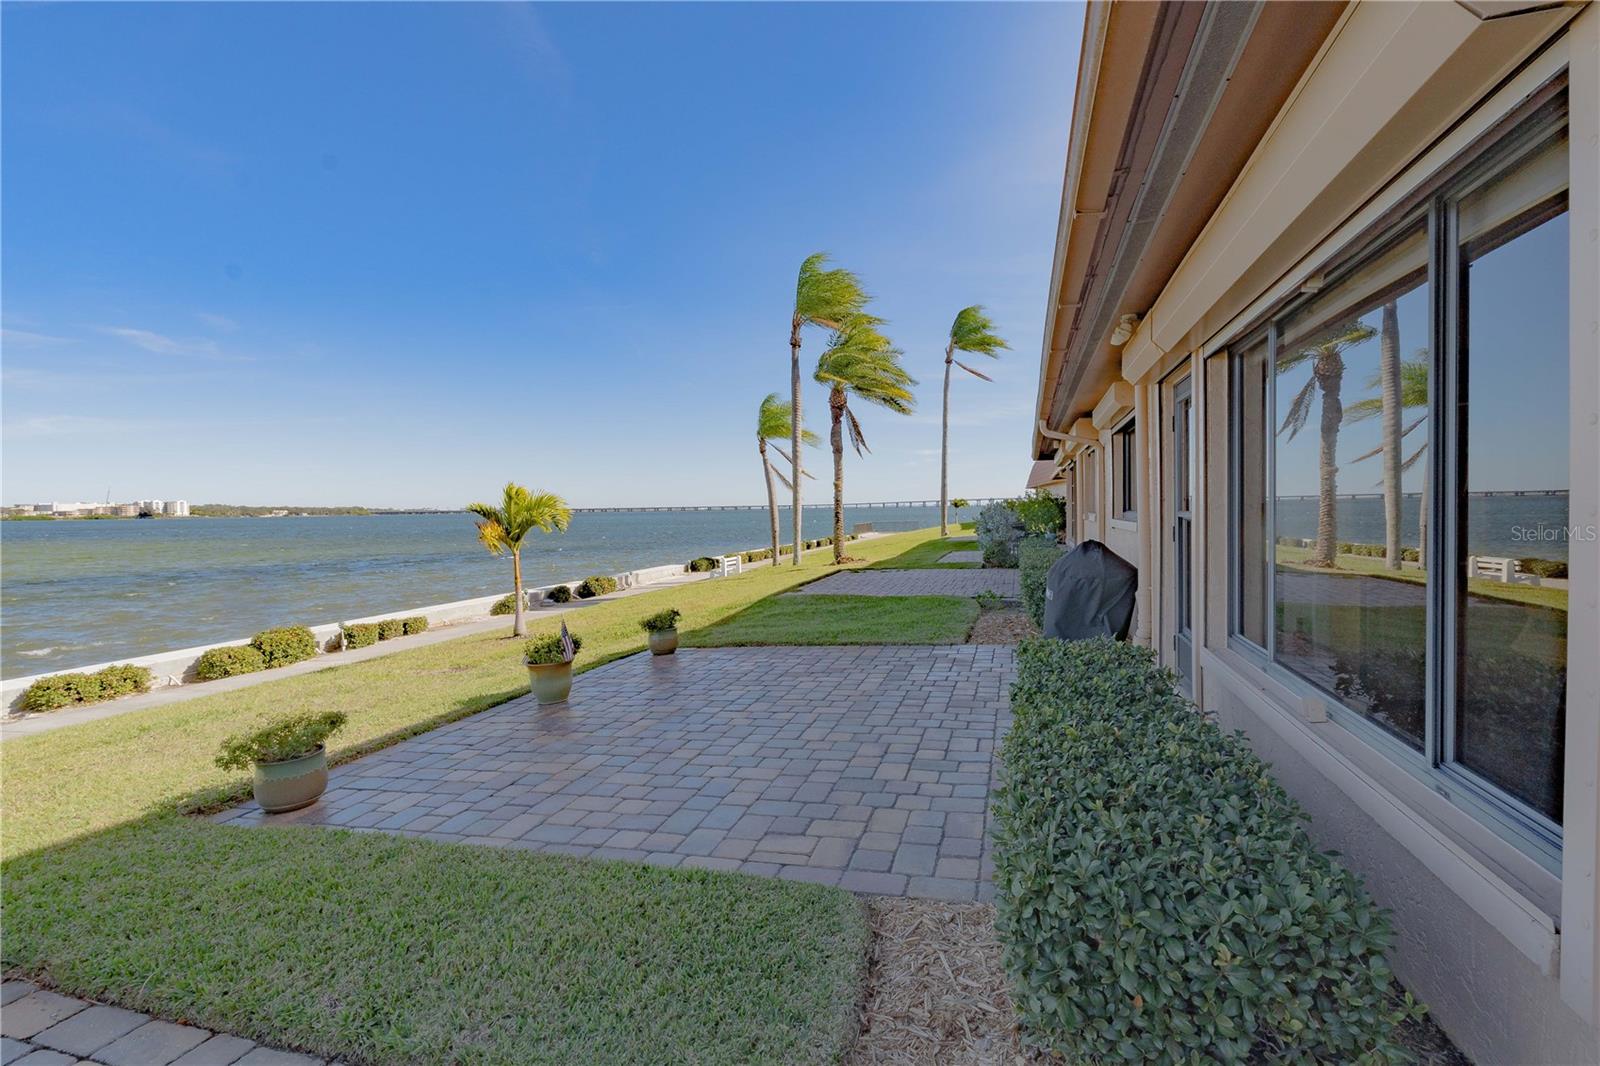 Water views abound! Panoramic views of the Tampa Bay!!  Walk way around the community, lighted and benches to sit and enjoy the warm breezes.  Look for manatee and dolphin in the beautiful waters.